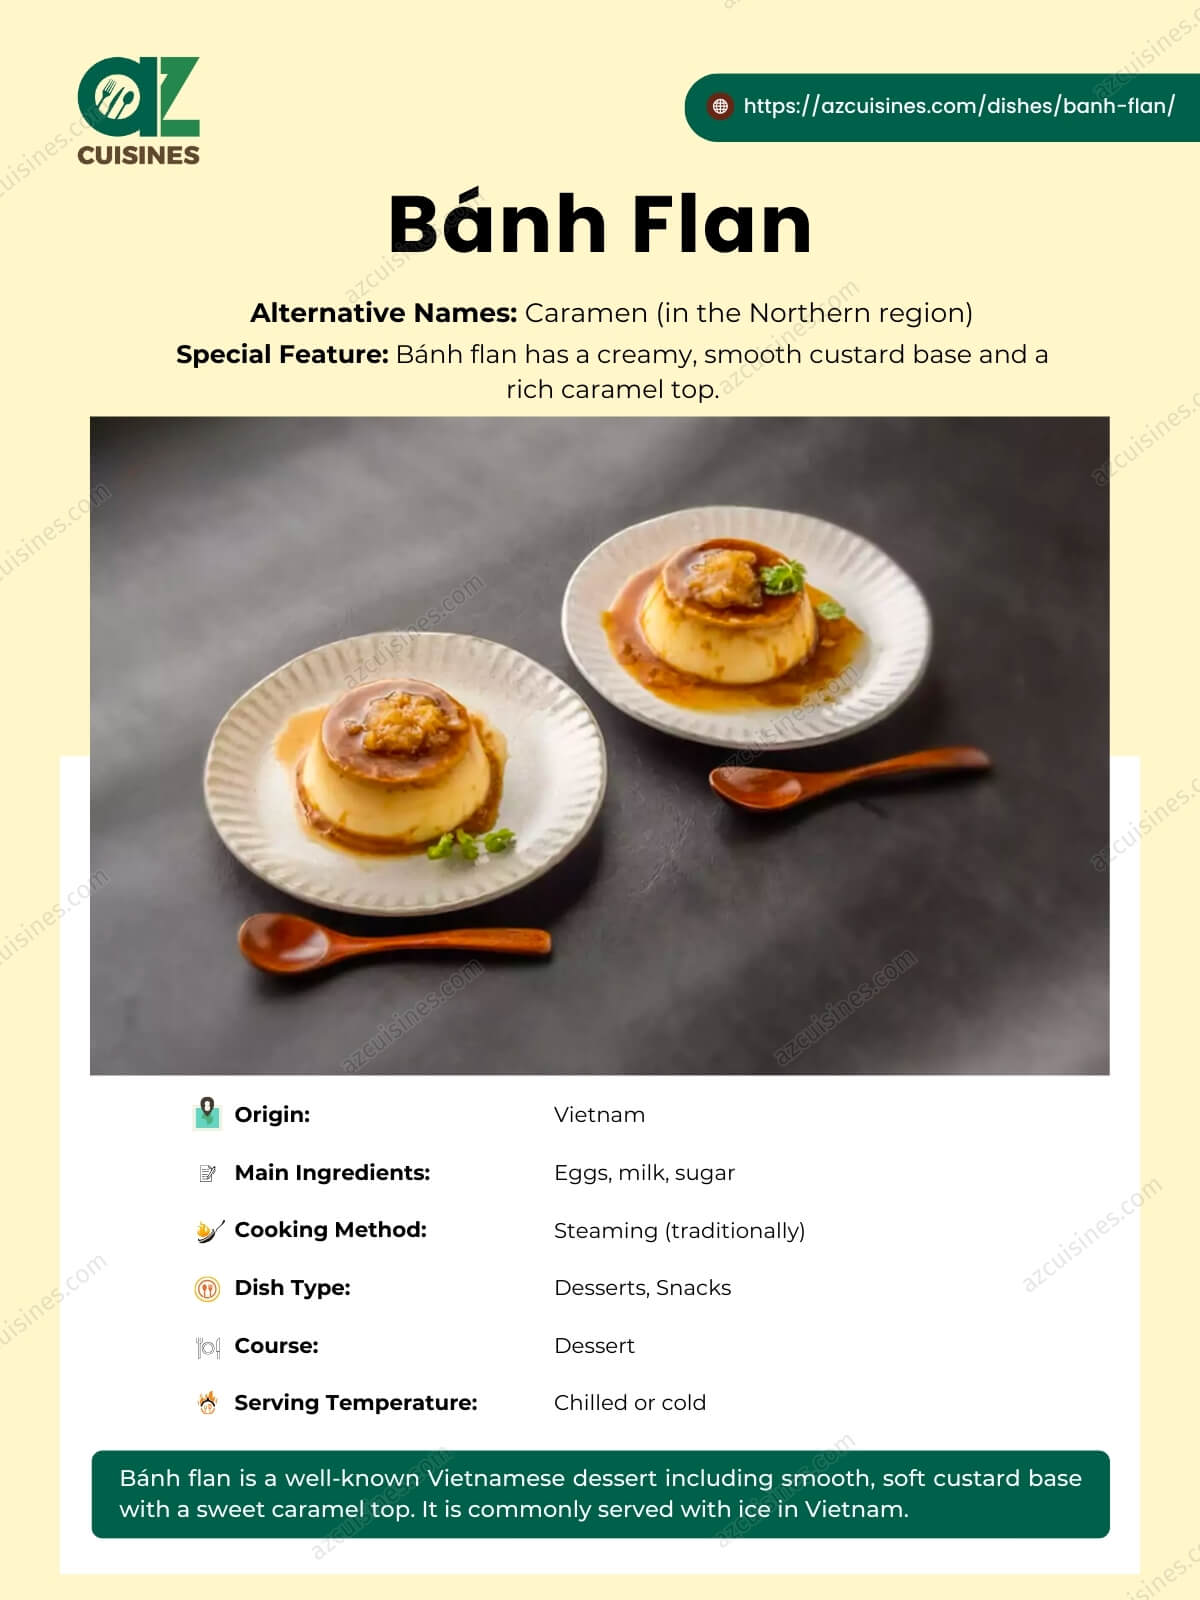 Banh Flan Overview